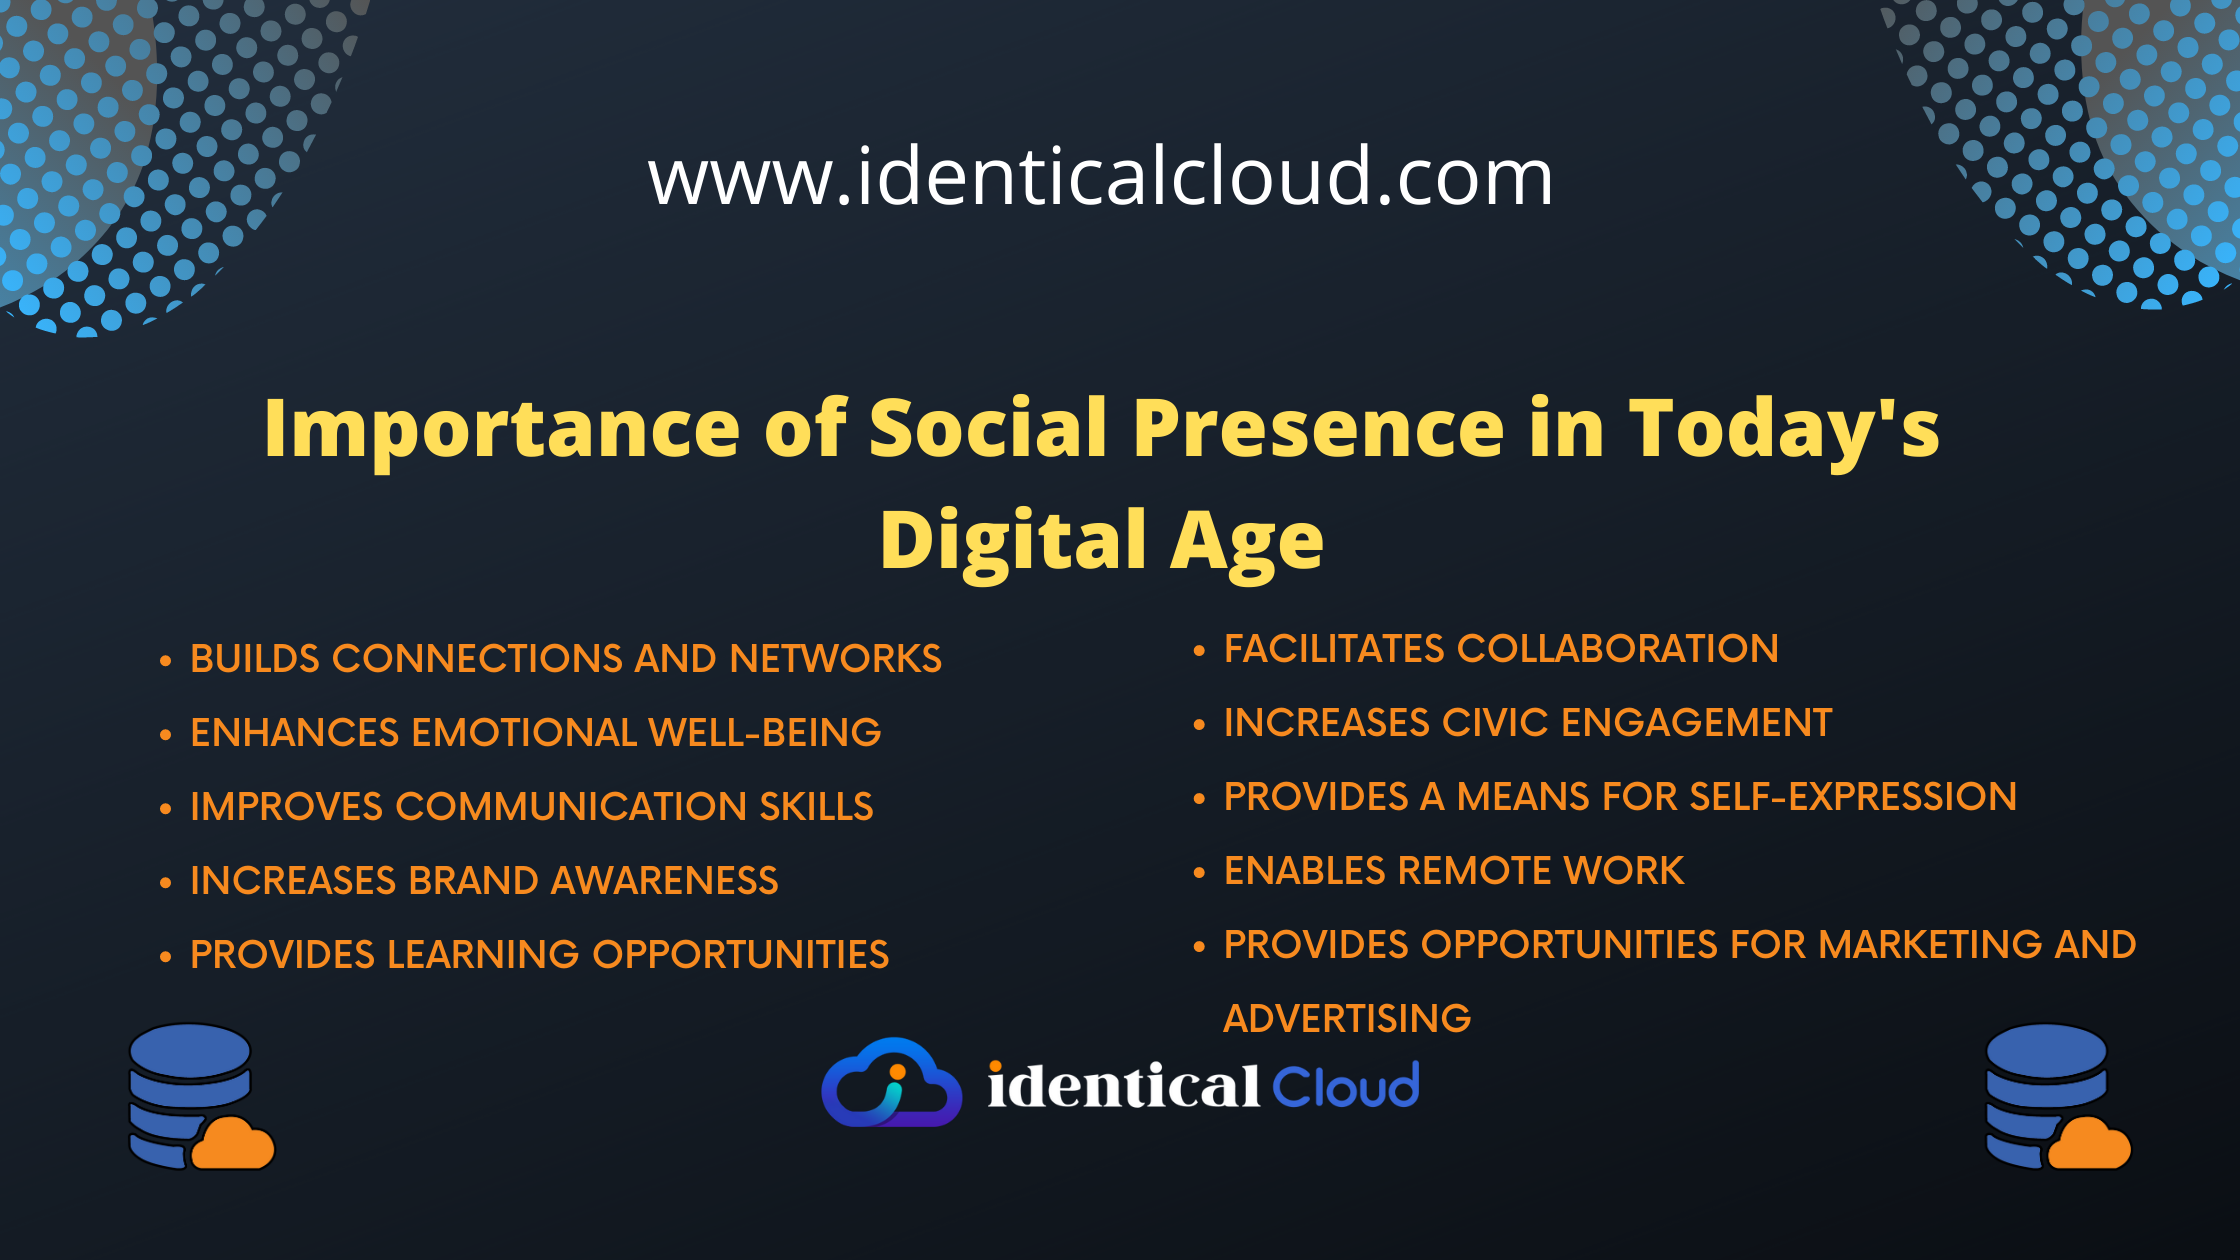 Importance of Social Presence in Today's Digital Age - identicalcloud.com